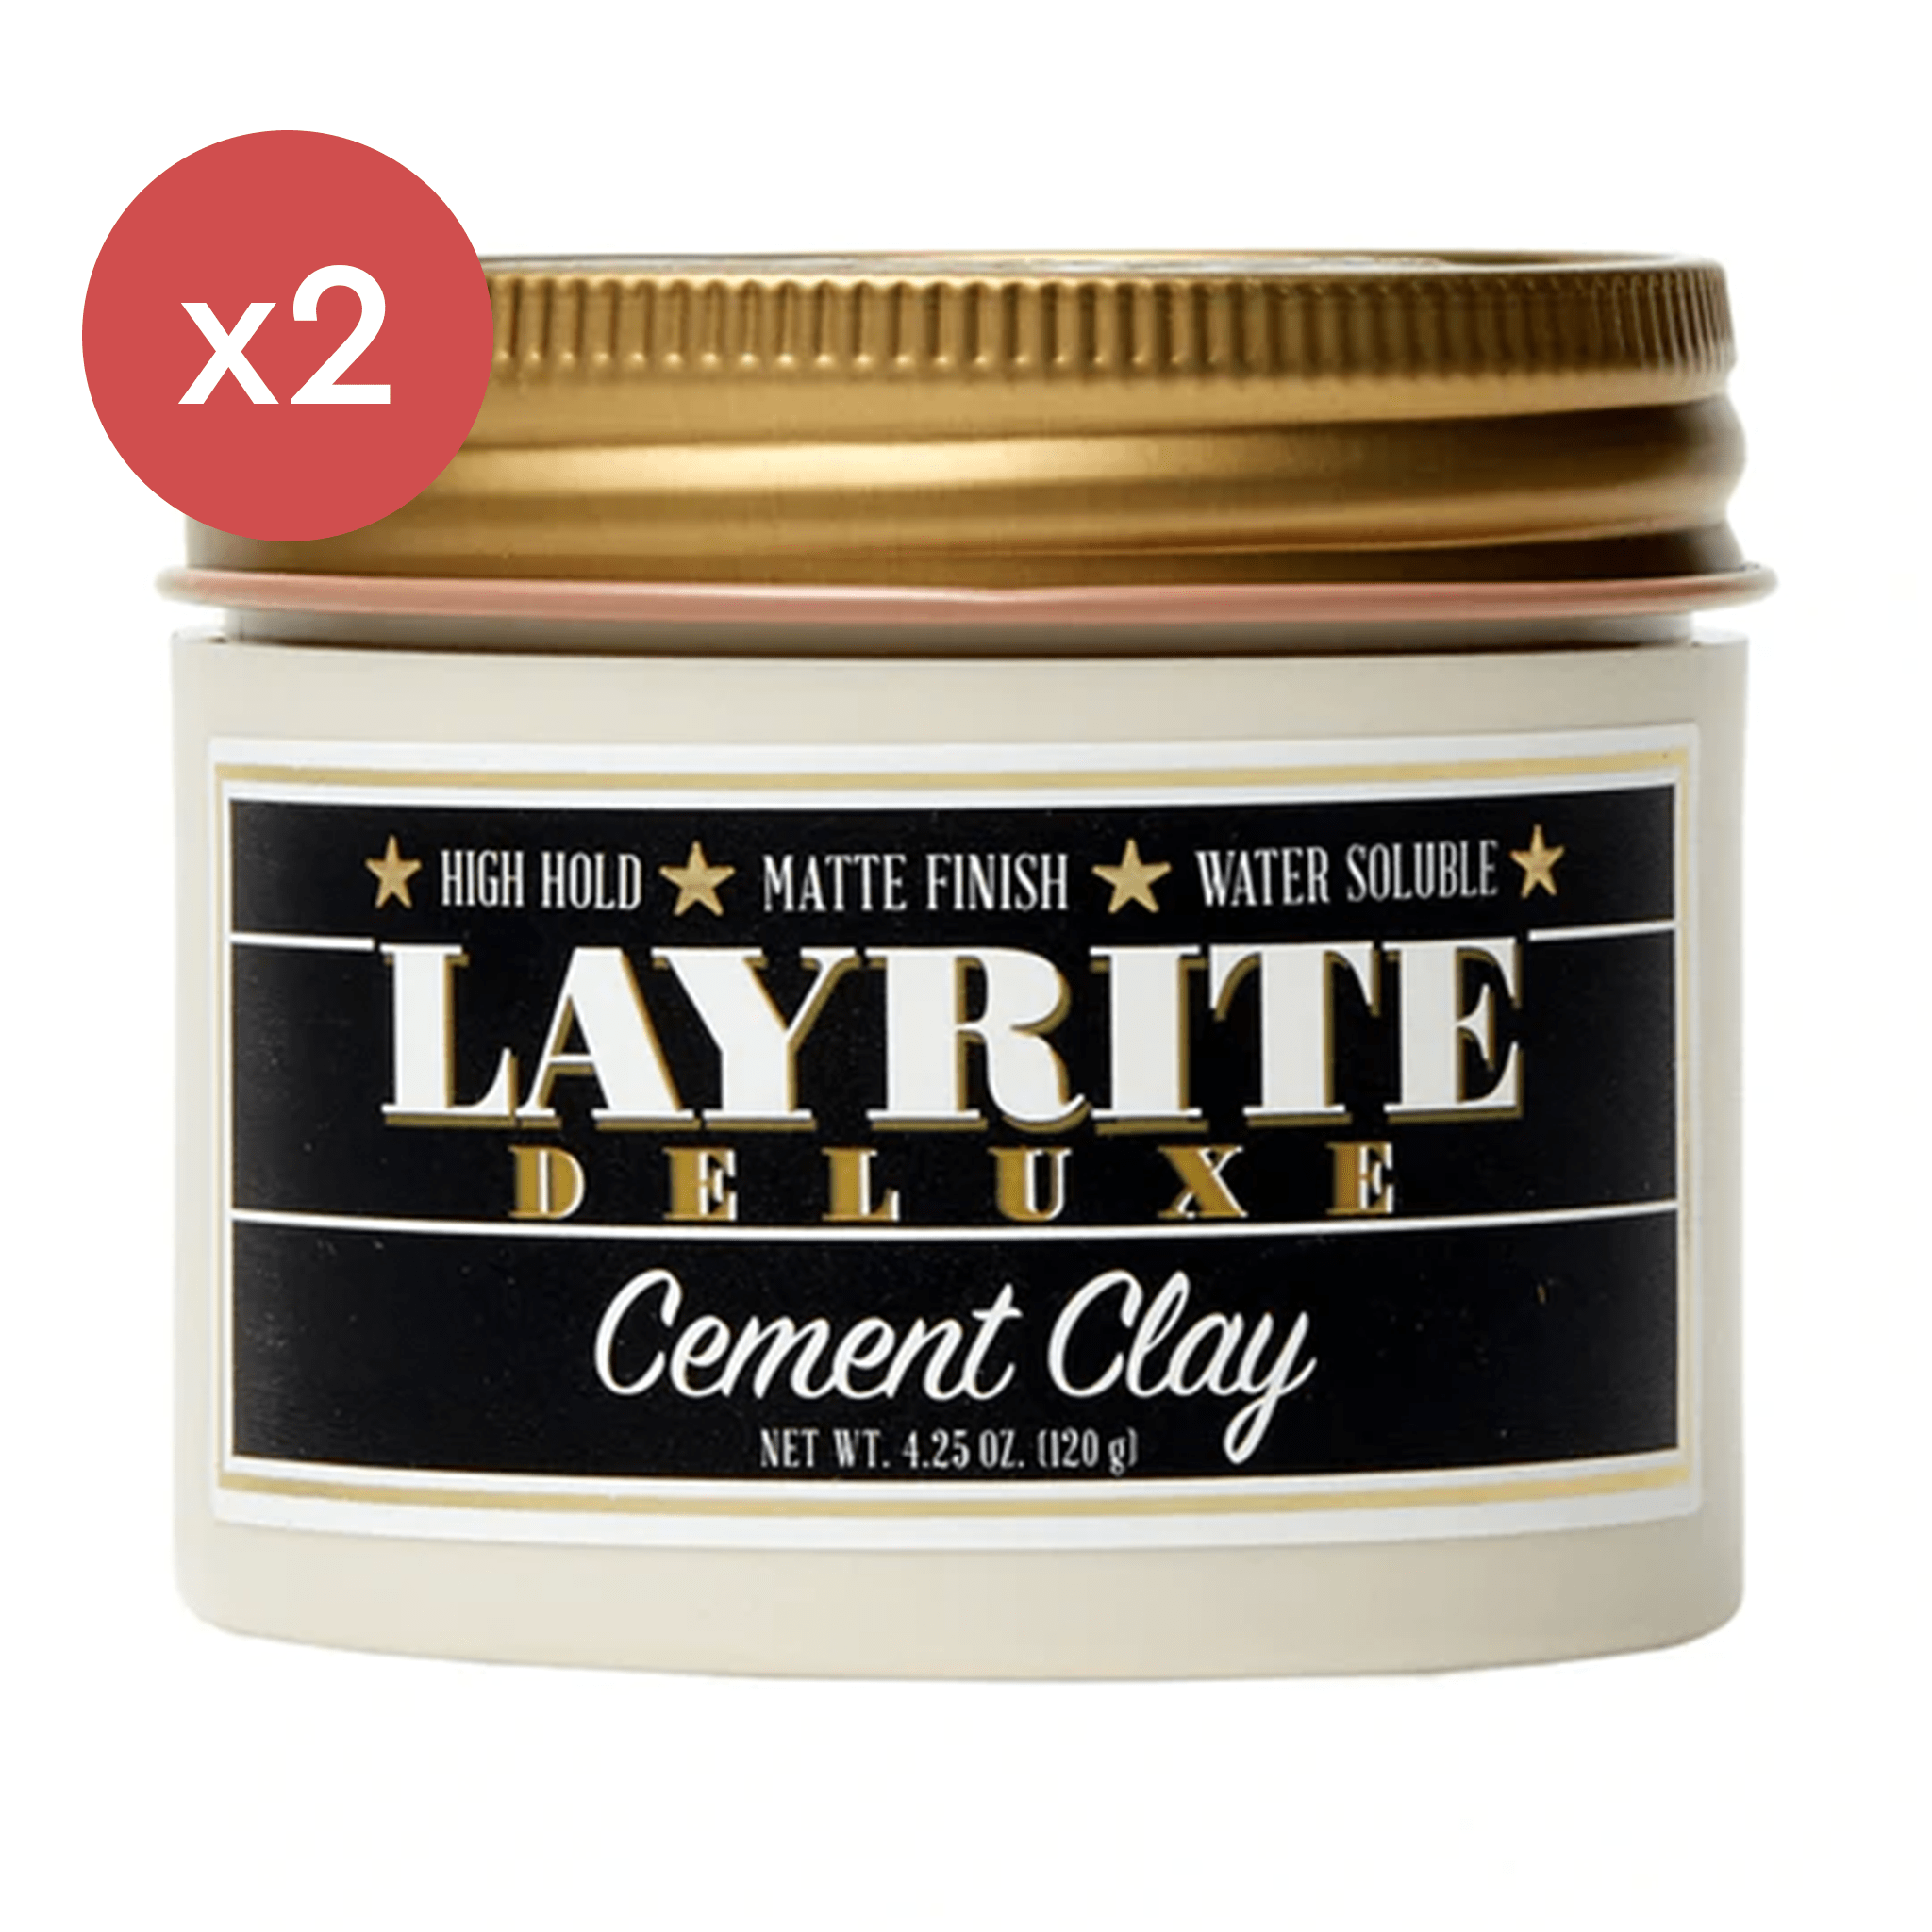 Layrite Cement Clay Duo Bundle